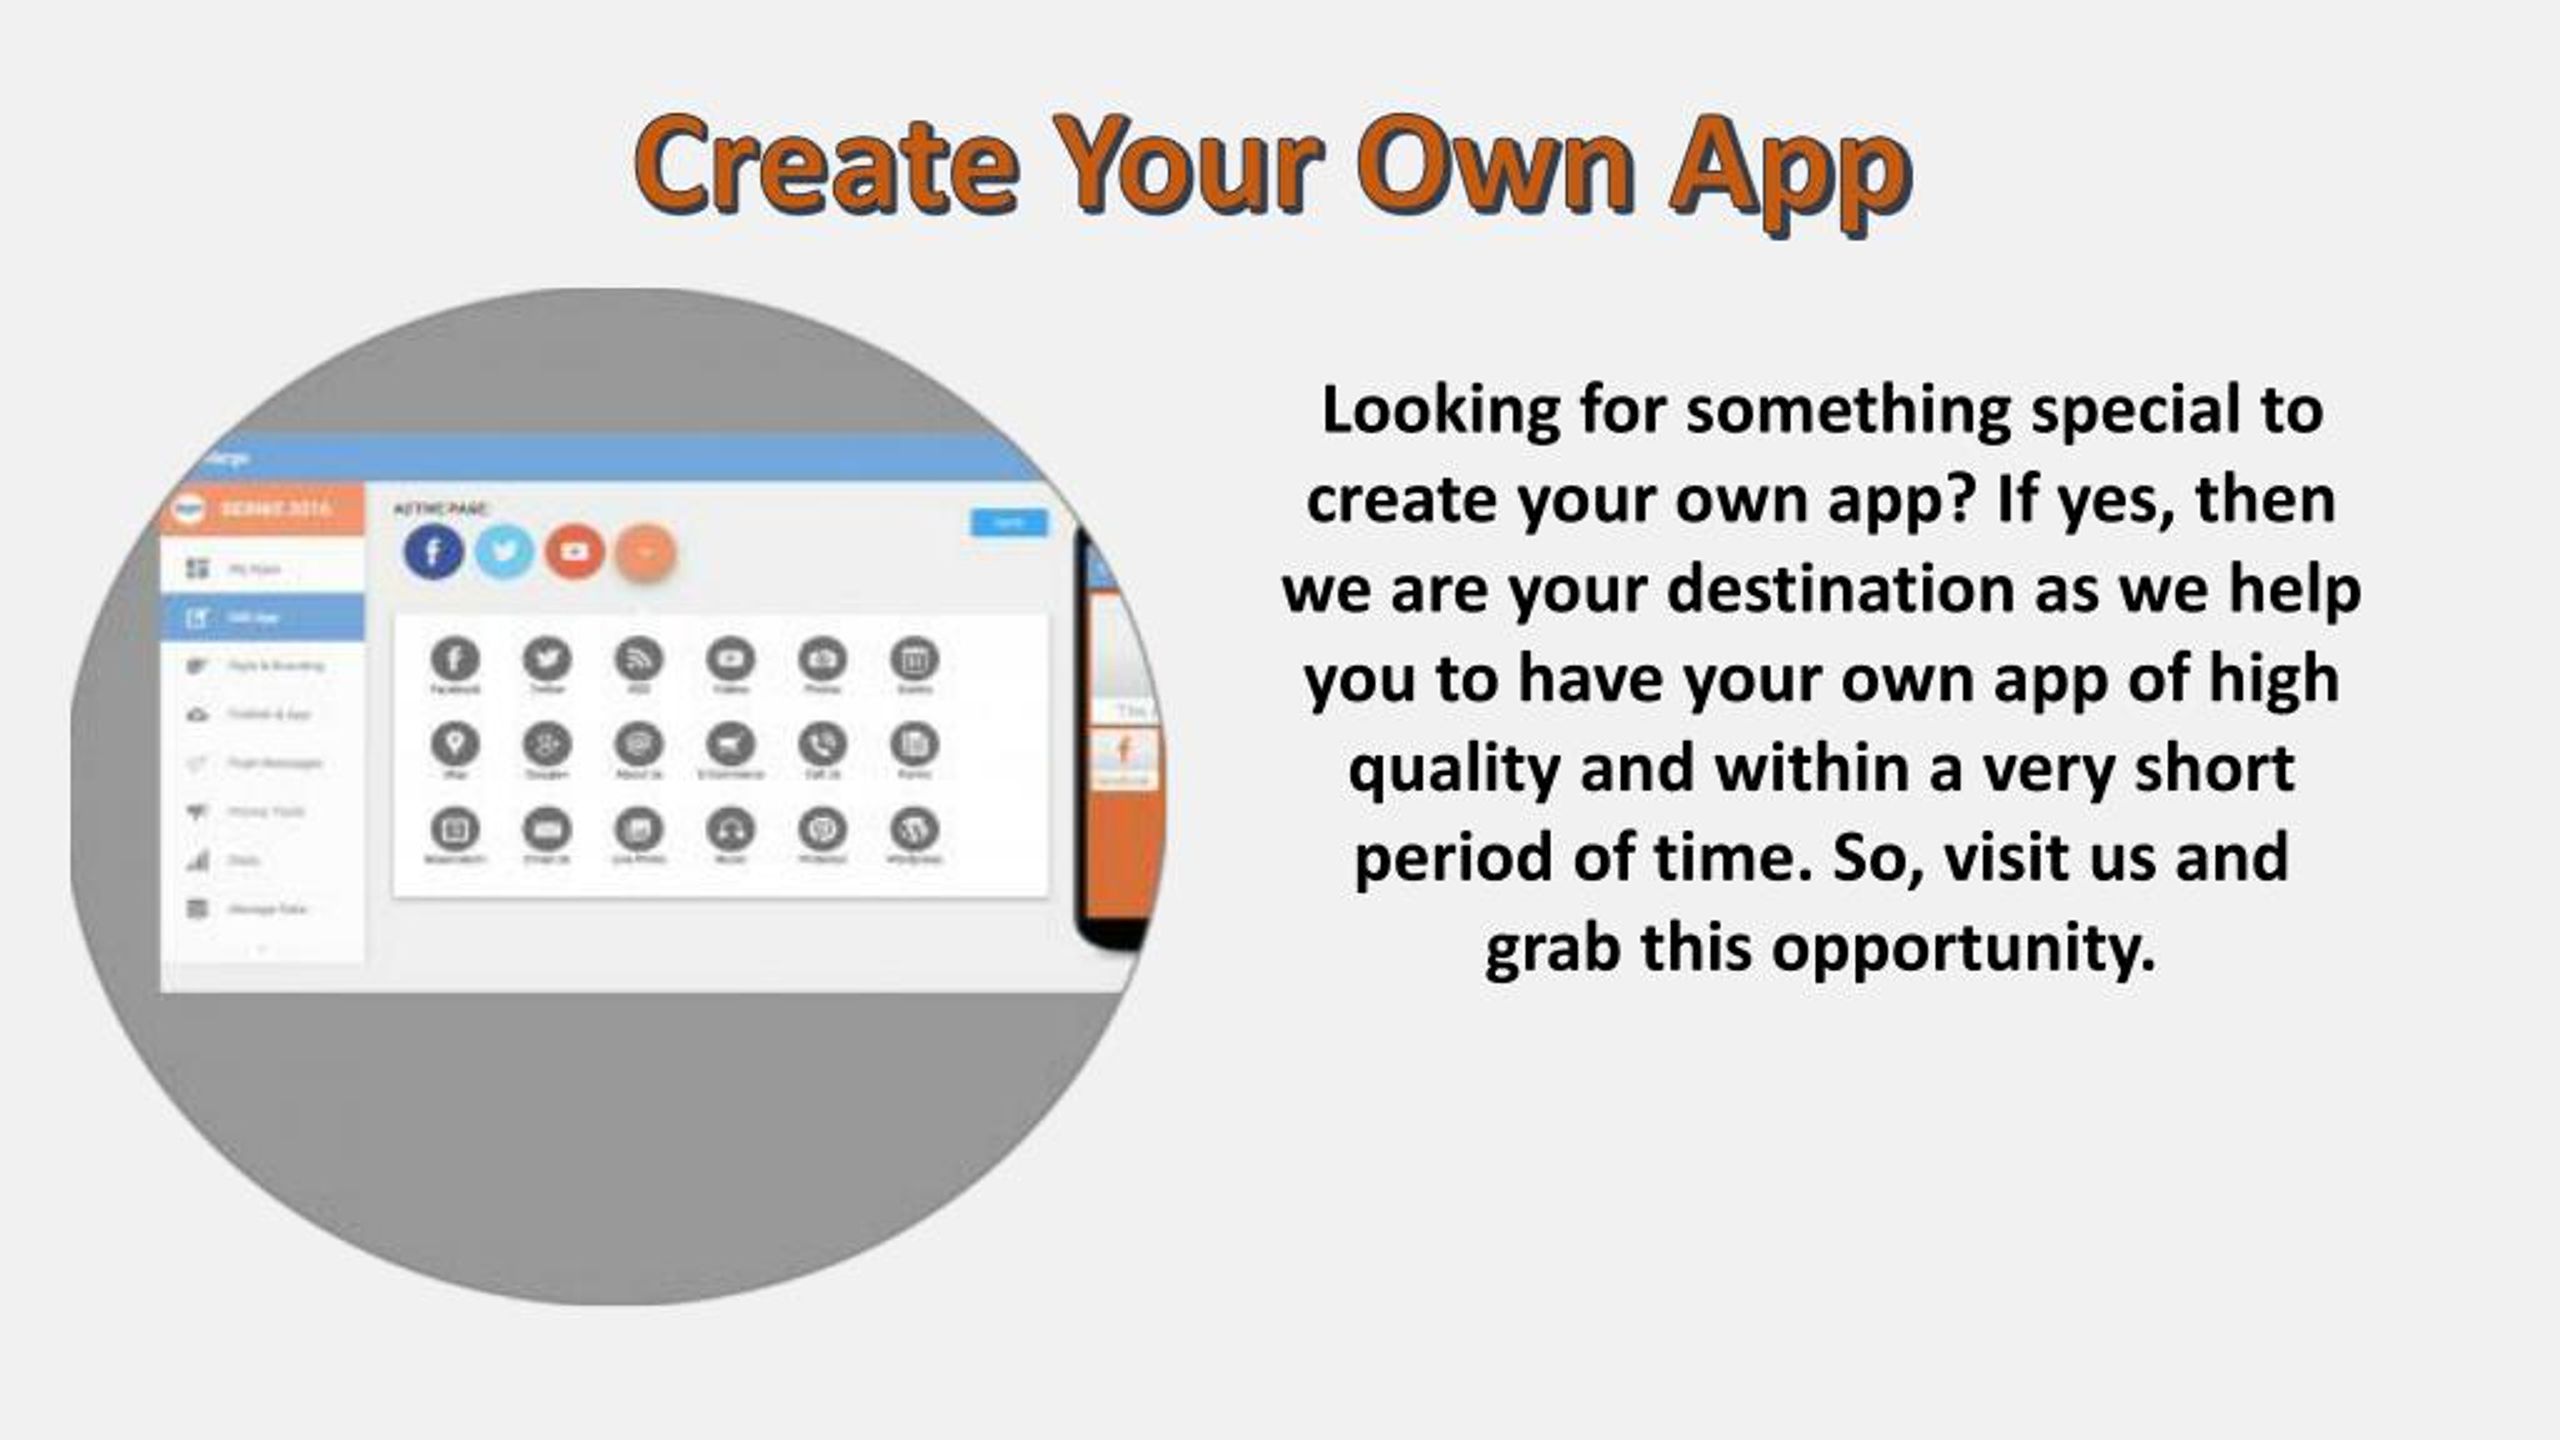 make your own app free